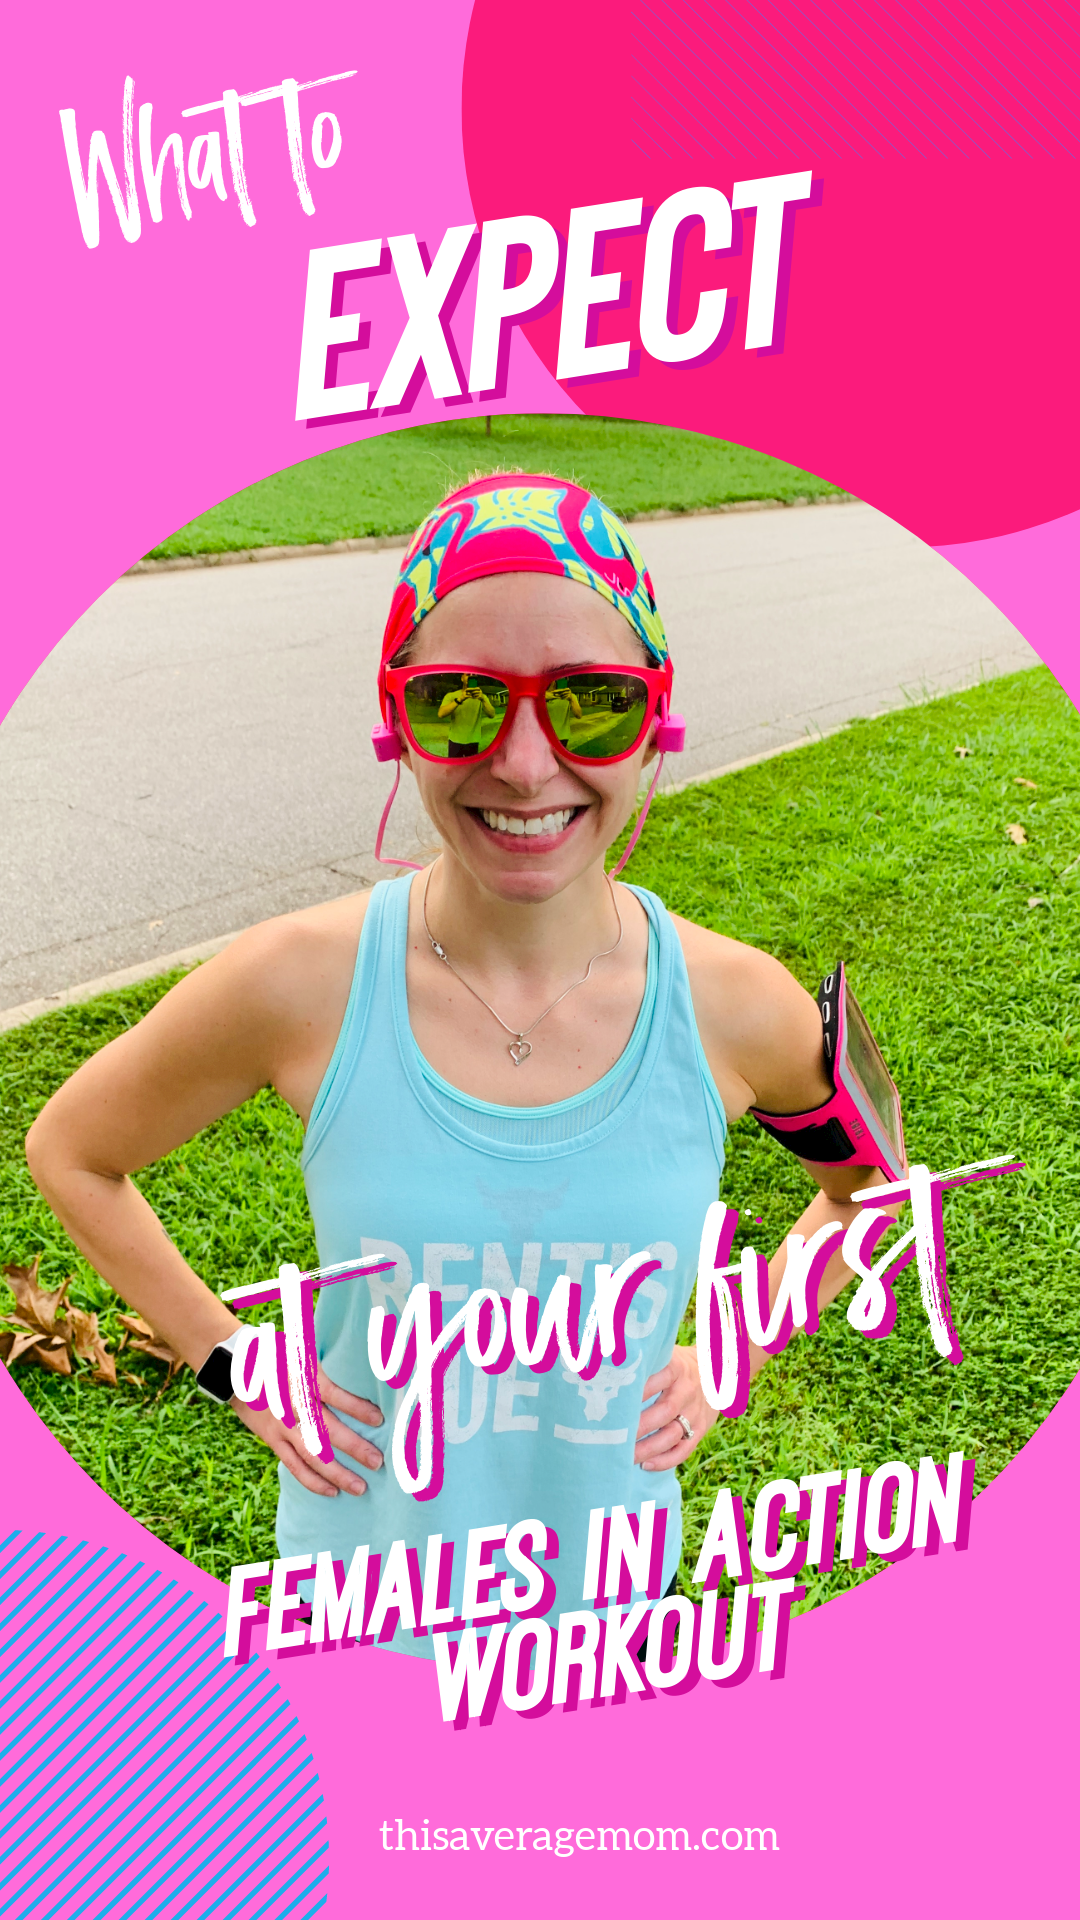 Getting invited to, or finding a FiA workout, might leave you with some questions on what to expect. Today, I'm sharing what the first workout with Females in Action was like for me so you know what to expect! #fitness #exercise #community #women